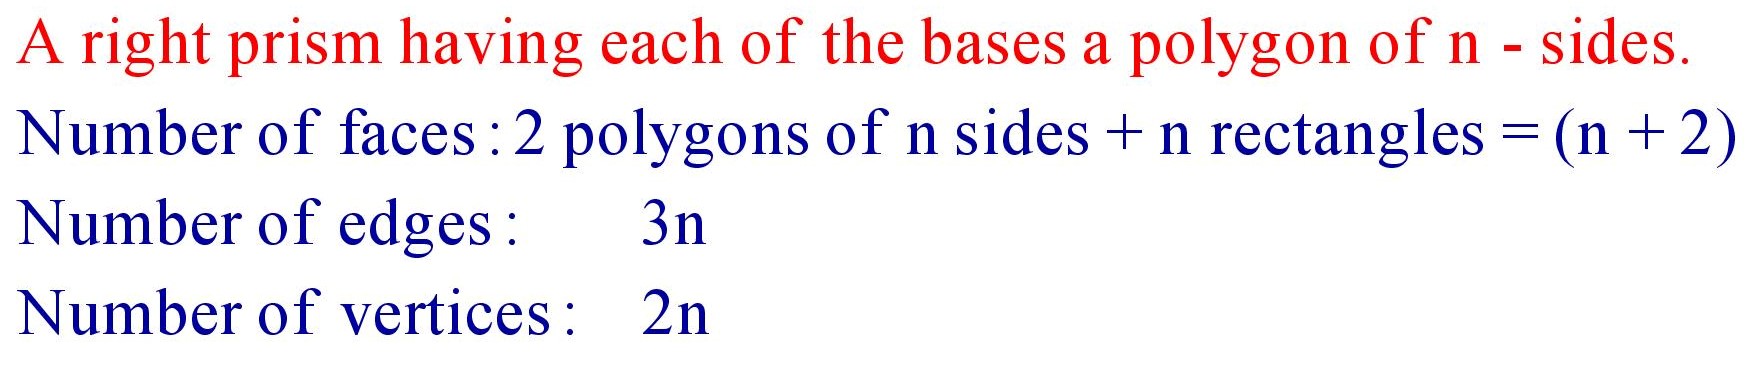 A right prism having each of the bases a polygon of n - sides